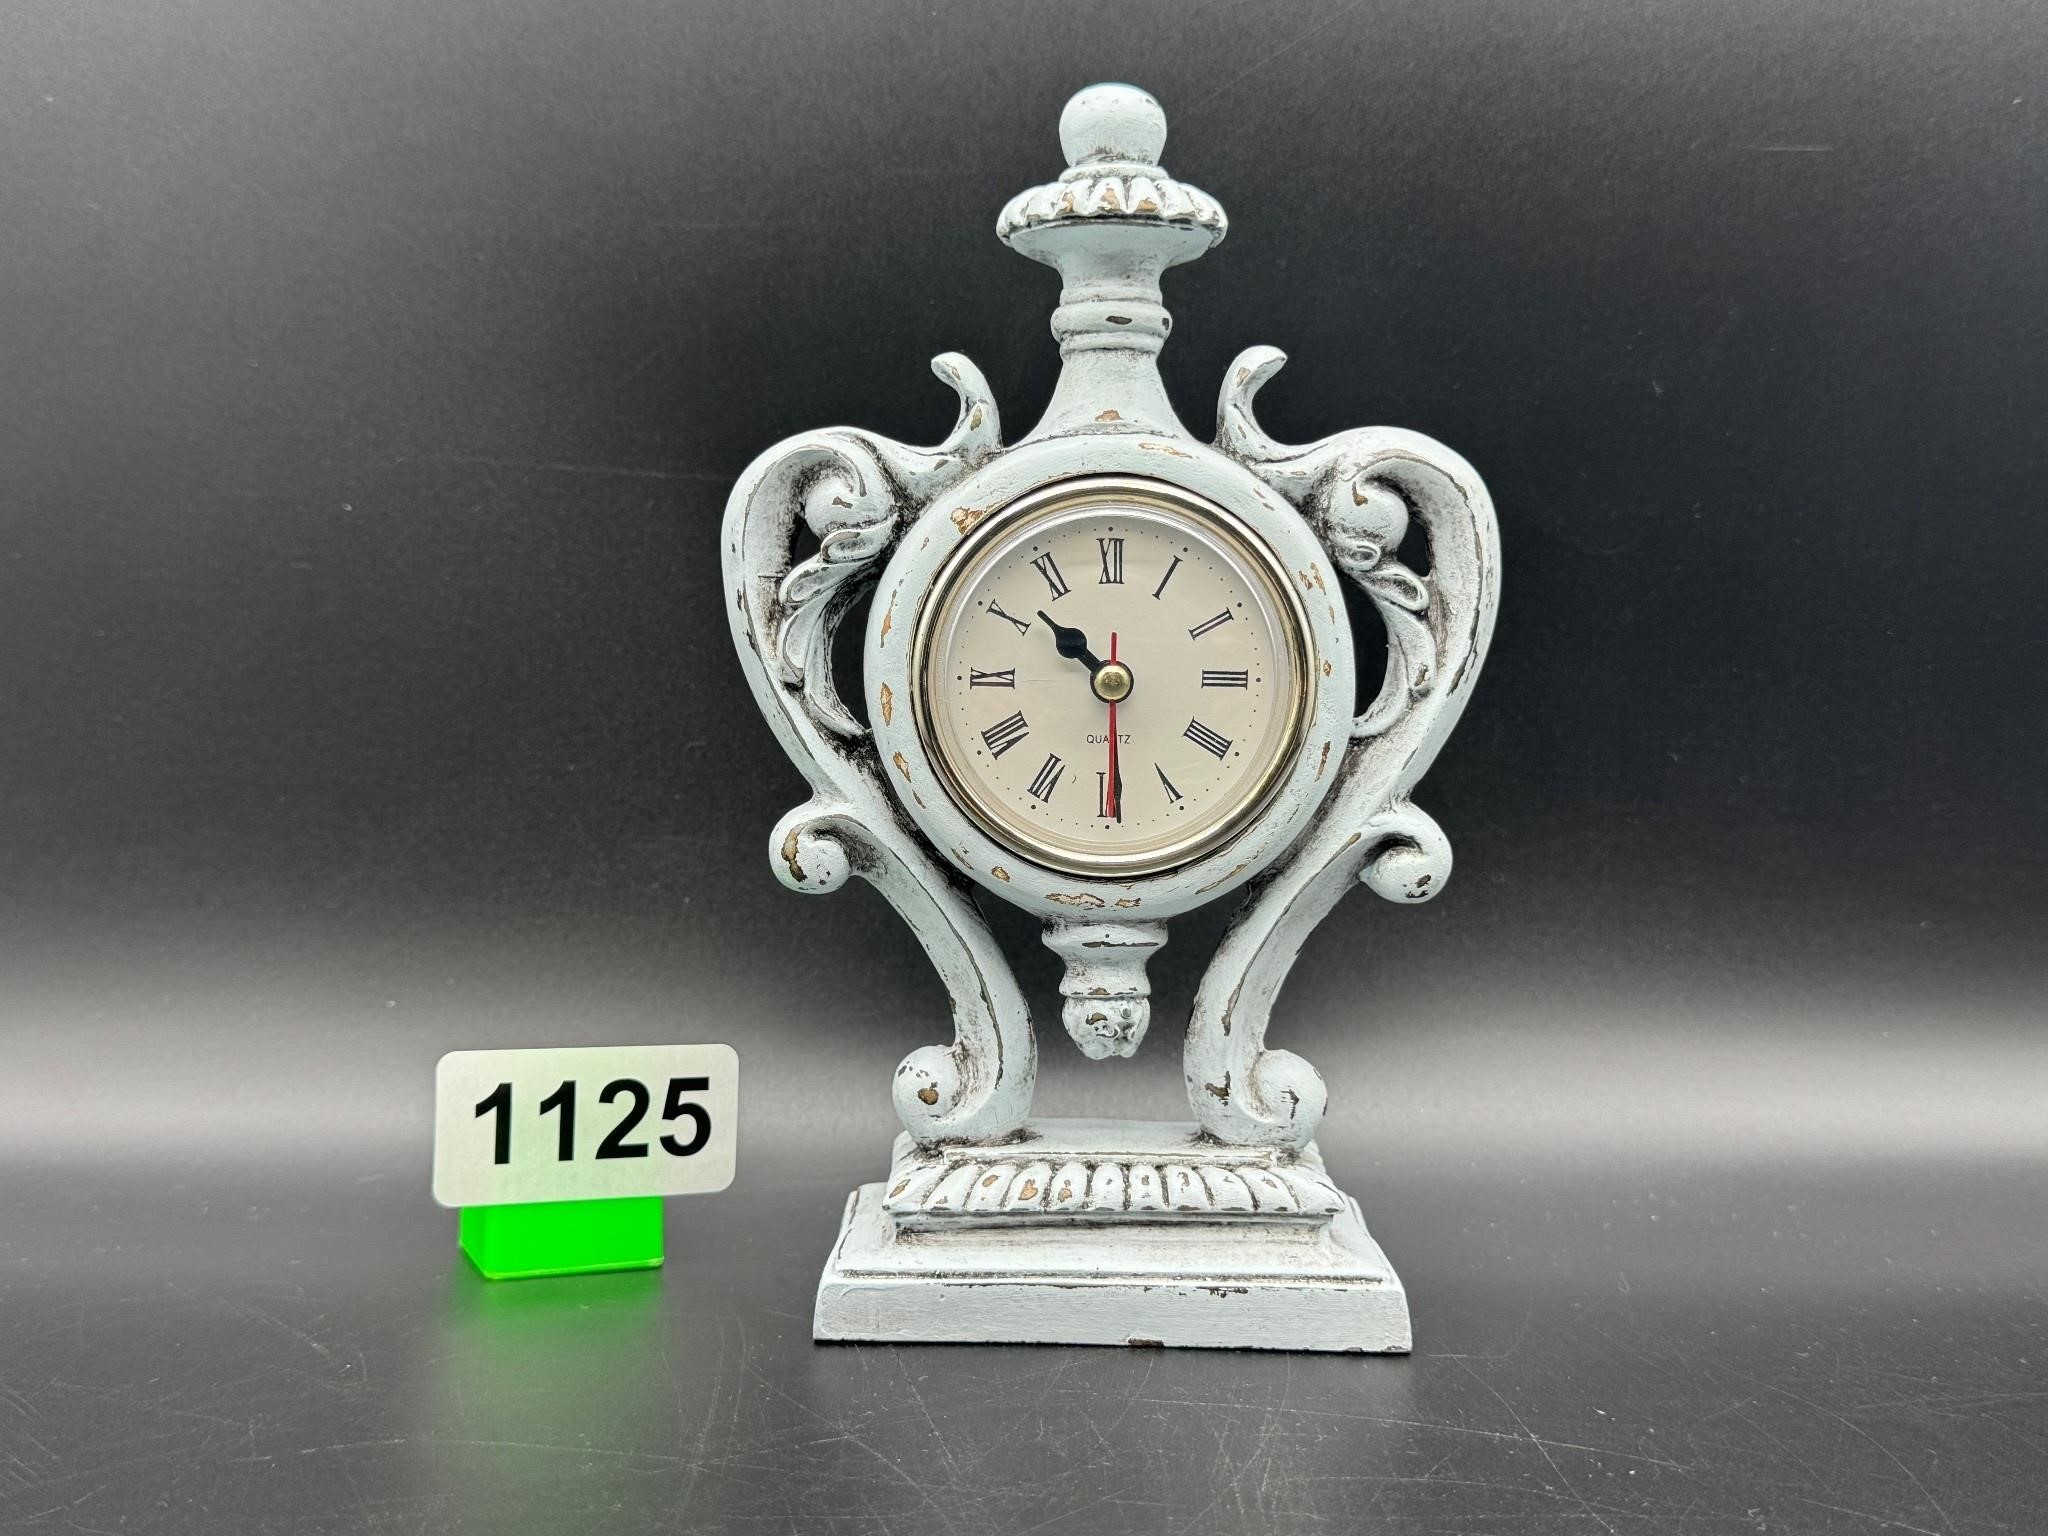 7" tall ornate metal clock with distressed paint